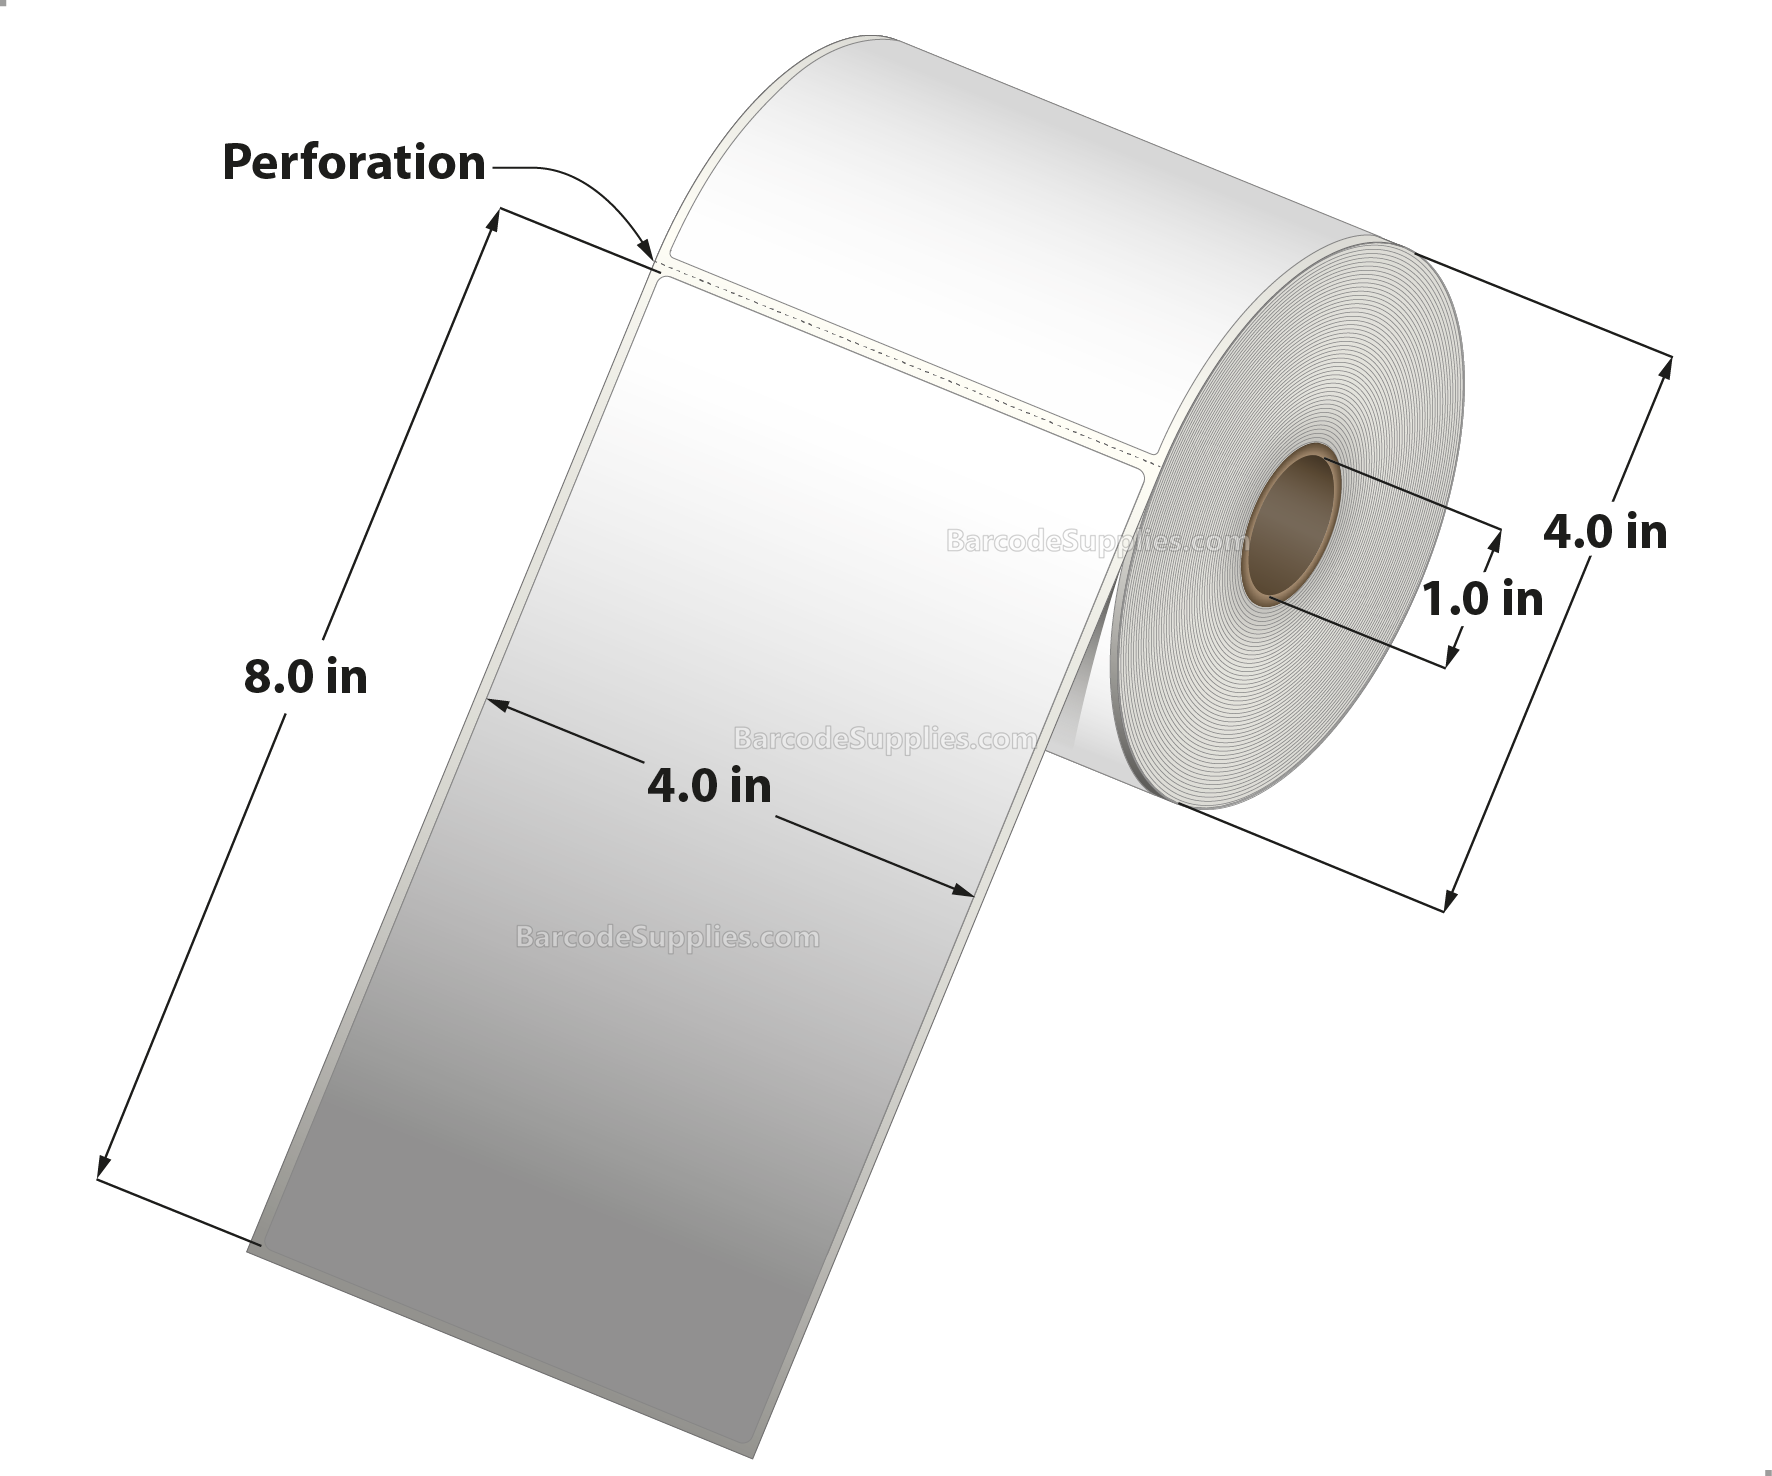 4 x 8 Direct Thermal White Labels With Acrylic Adhesive - Perforated - 200 Labels Per Roll - Carton Of 12 Rolls - 2400 Labels Total - MPN: RD-4-8-200-1